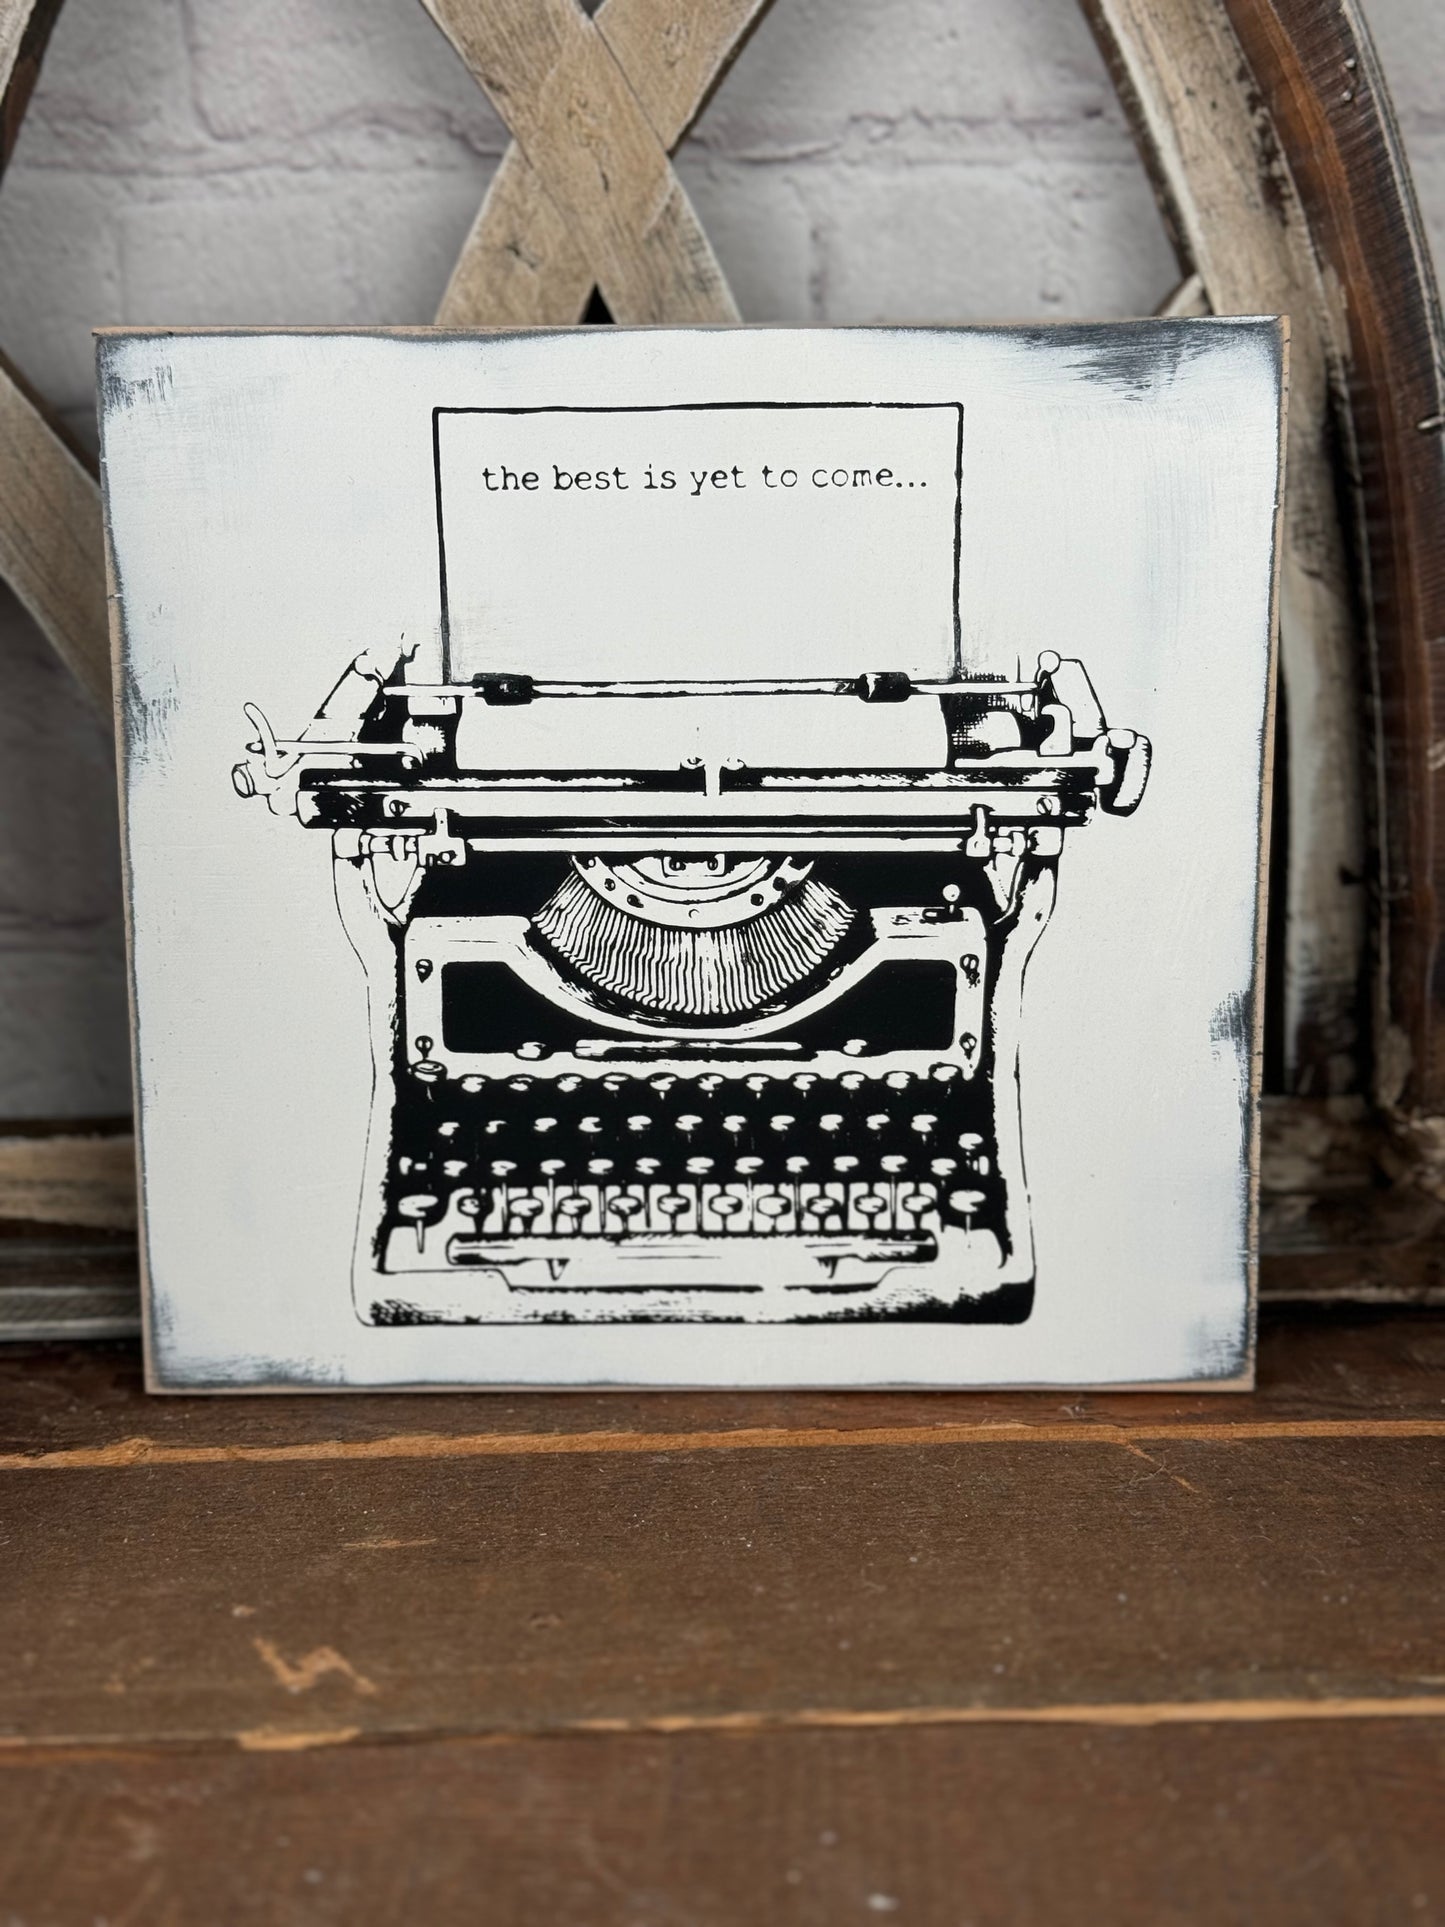 THE BEST IS YET TO COME -VINTAGE TYPEWRITER -WOOD SIGN